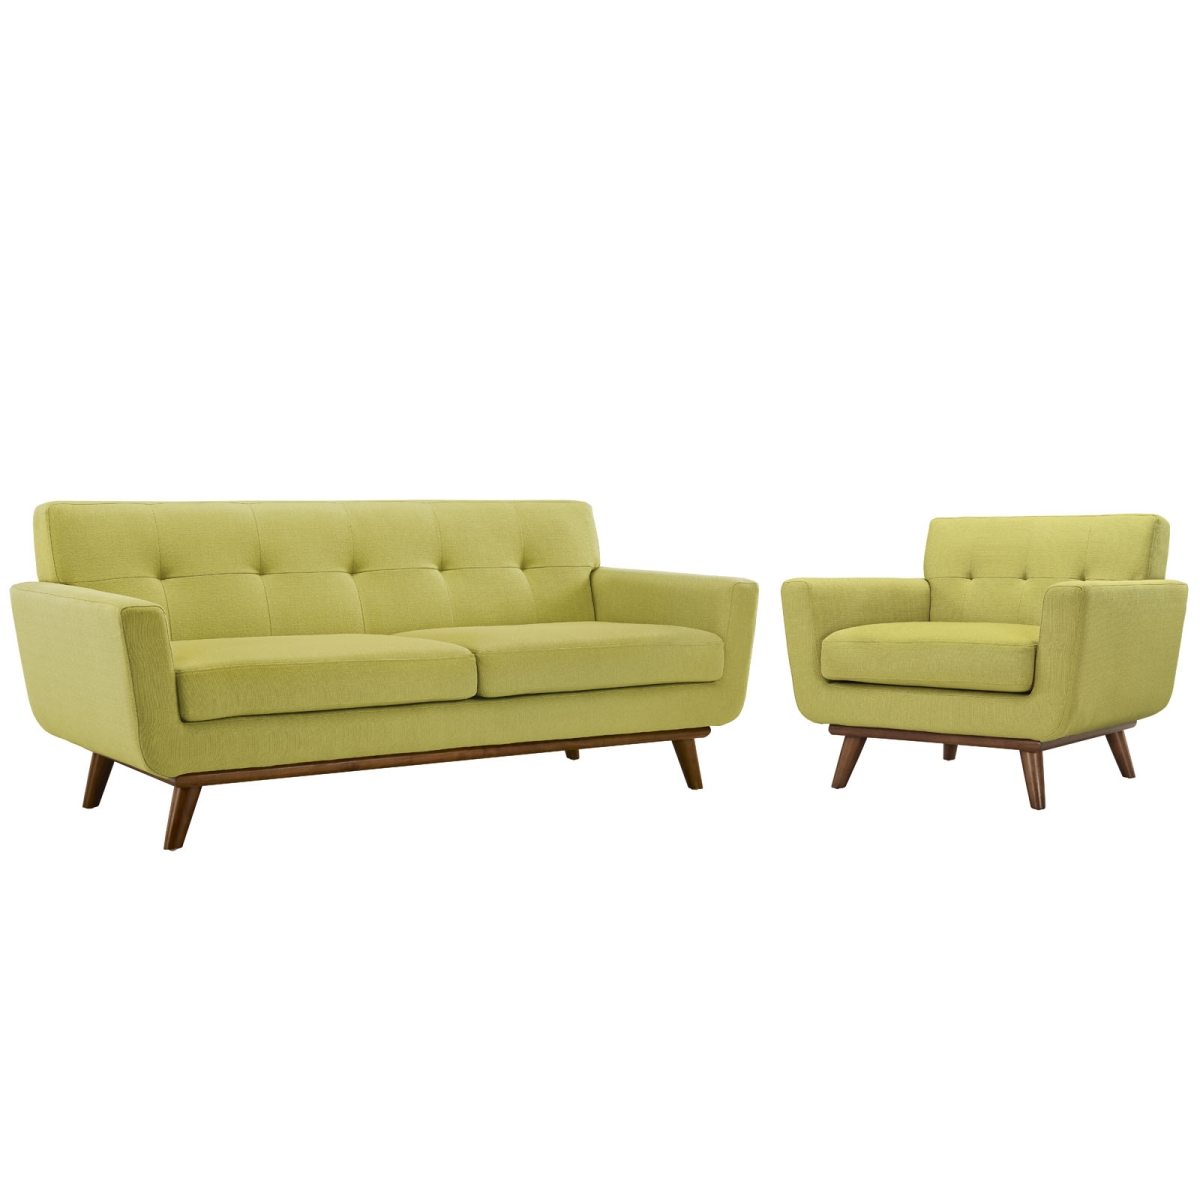 Eastend Eei-1346-whe Engage Armchair & Loveseat In Tufted Wheat Fabric With Cherry Finished Wood Legs